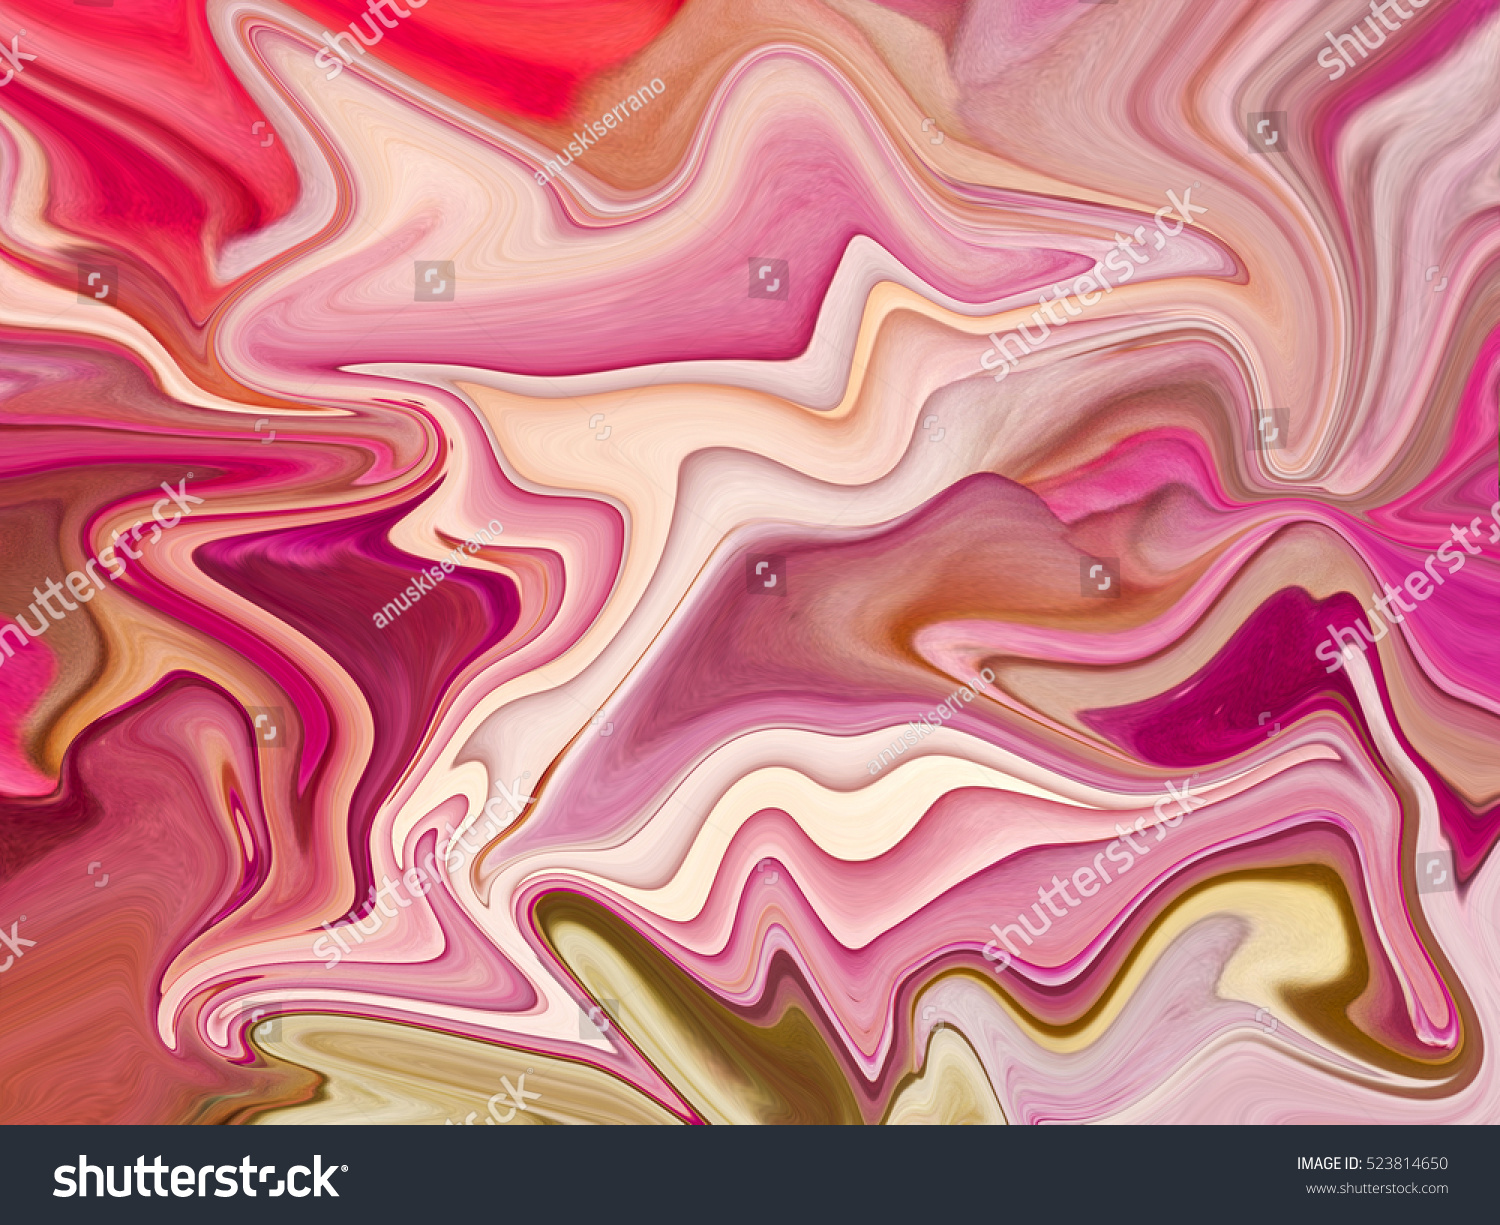 Background of a beautiful distorted rose #523814650